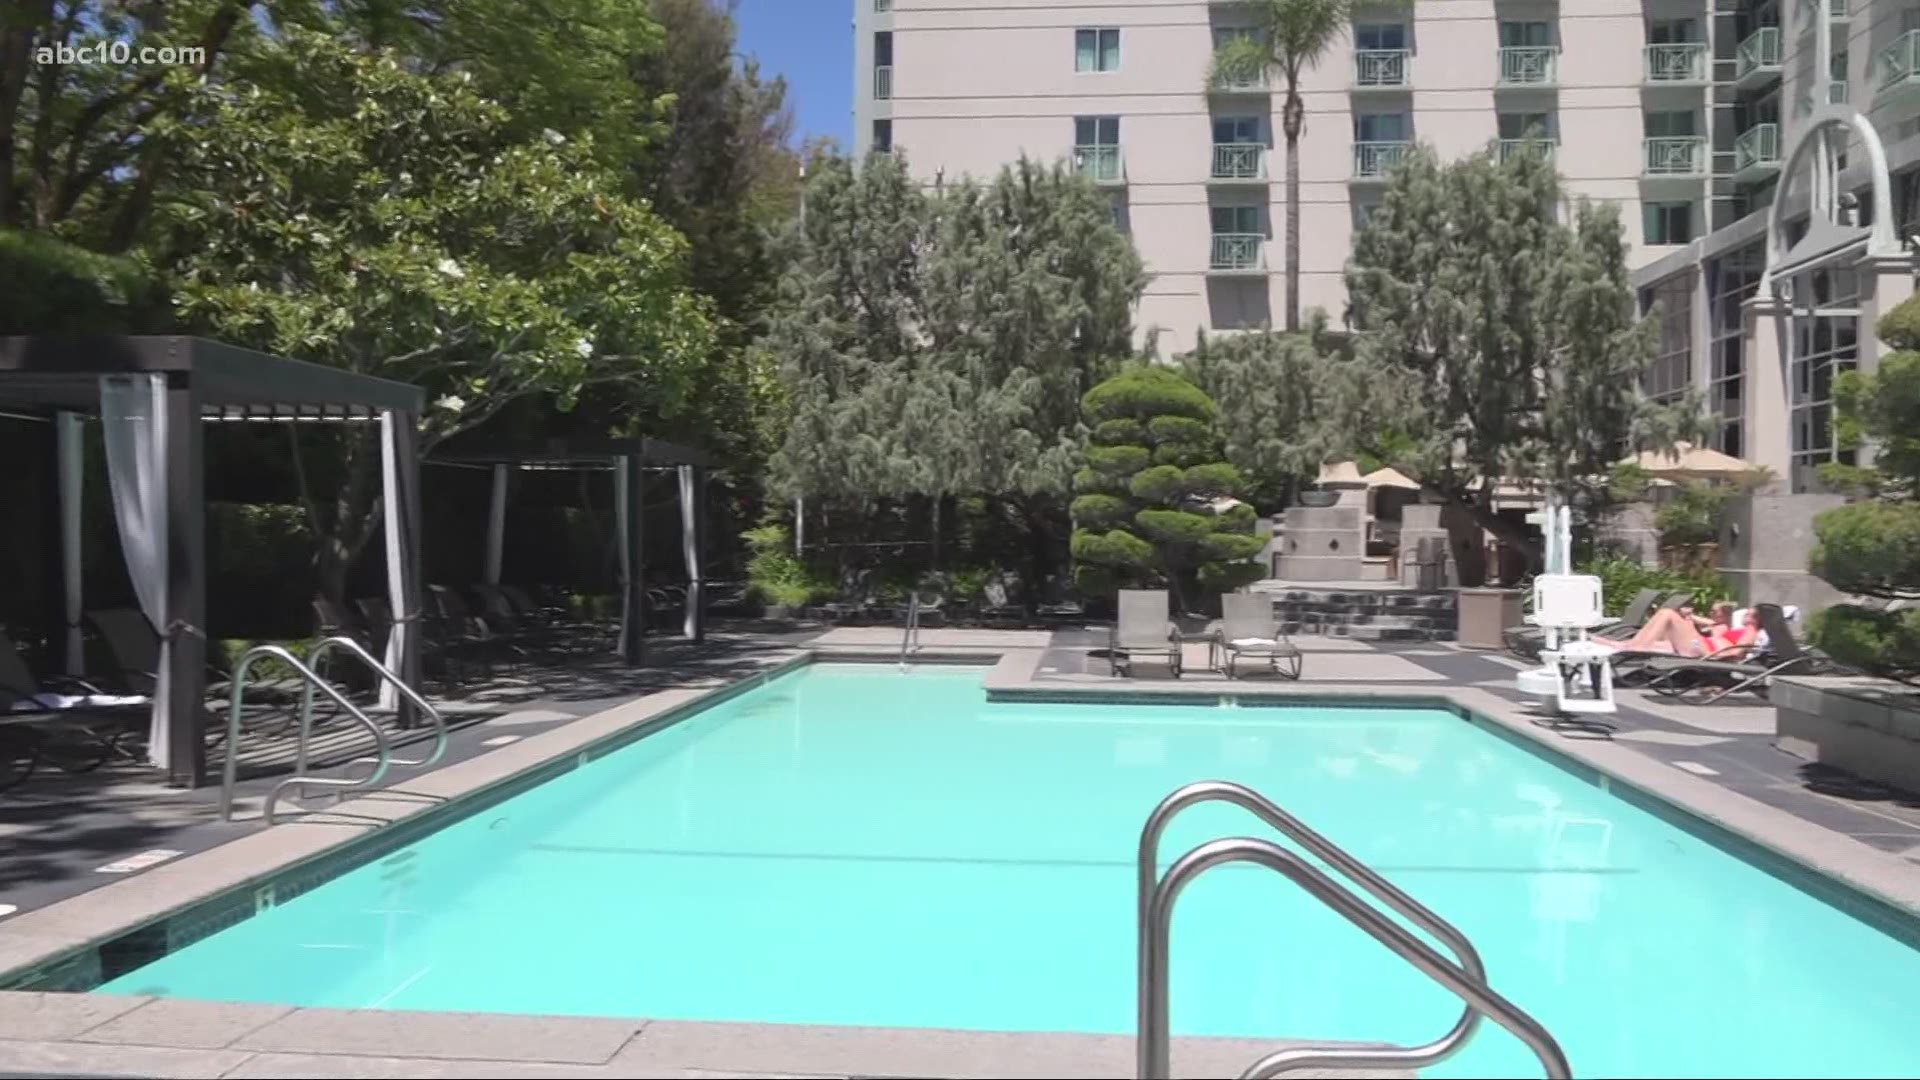 With convention centers and the Capitol closed, downtown Sacramento hotels have seen less bookings during the pandemic.